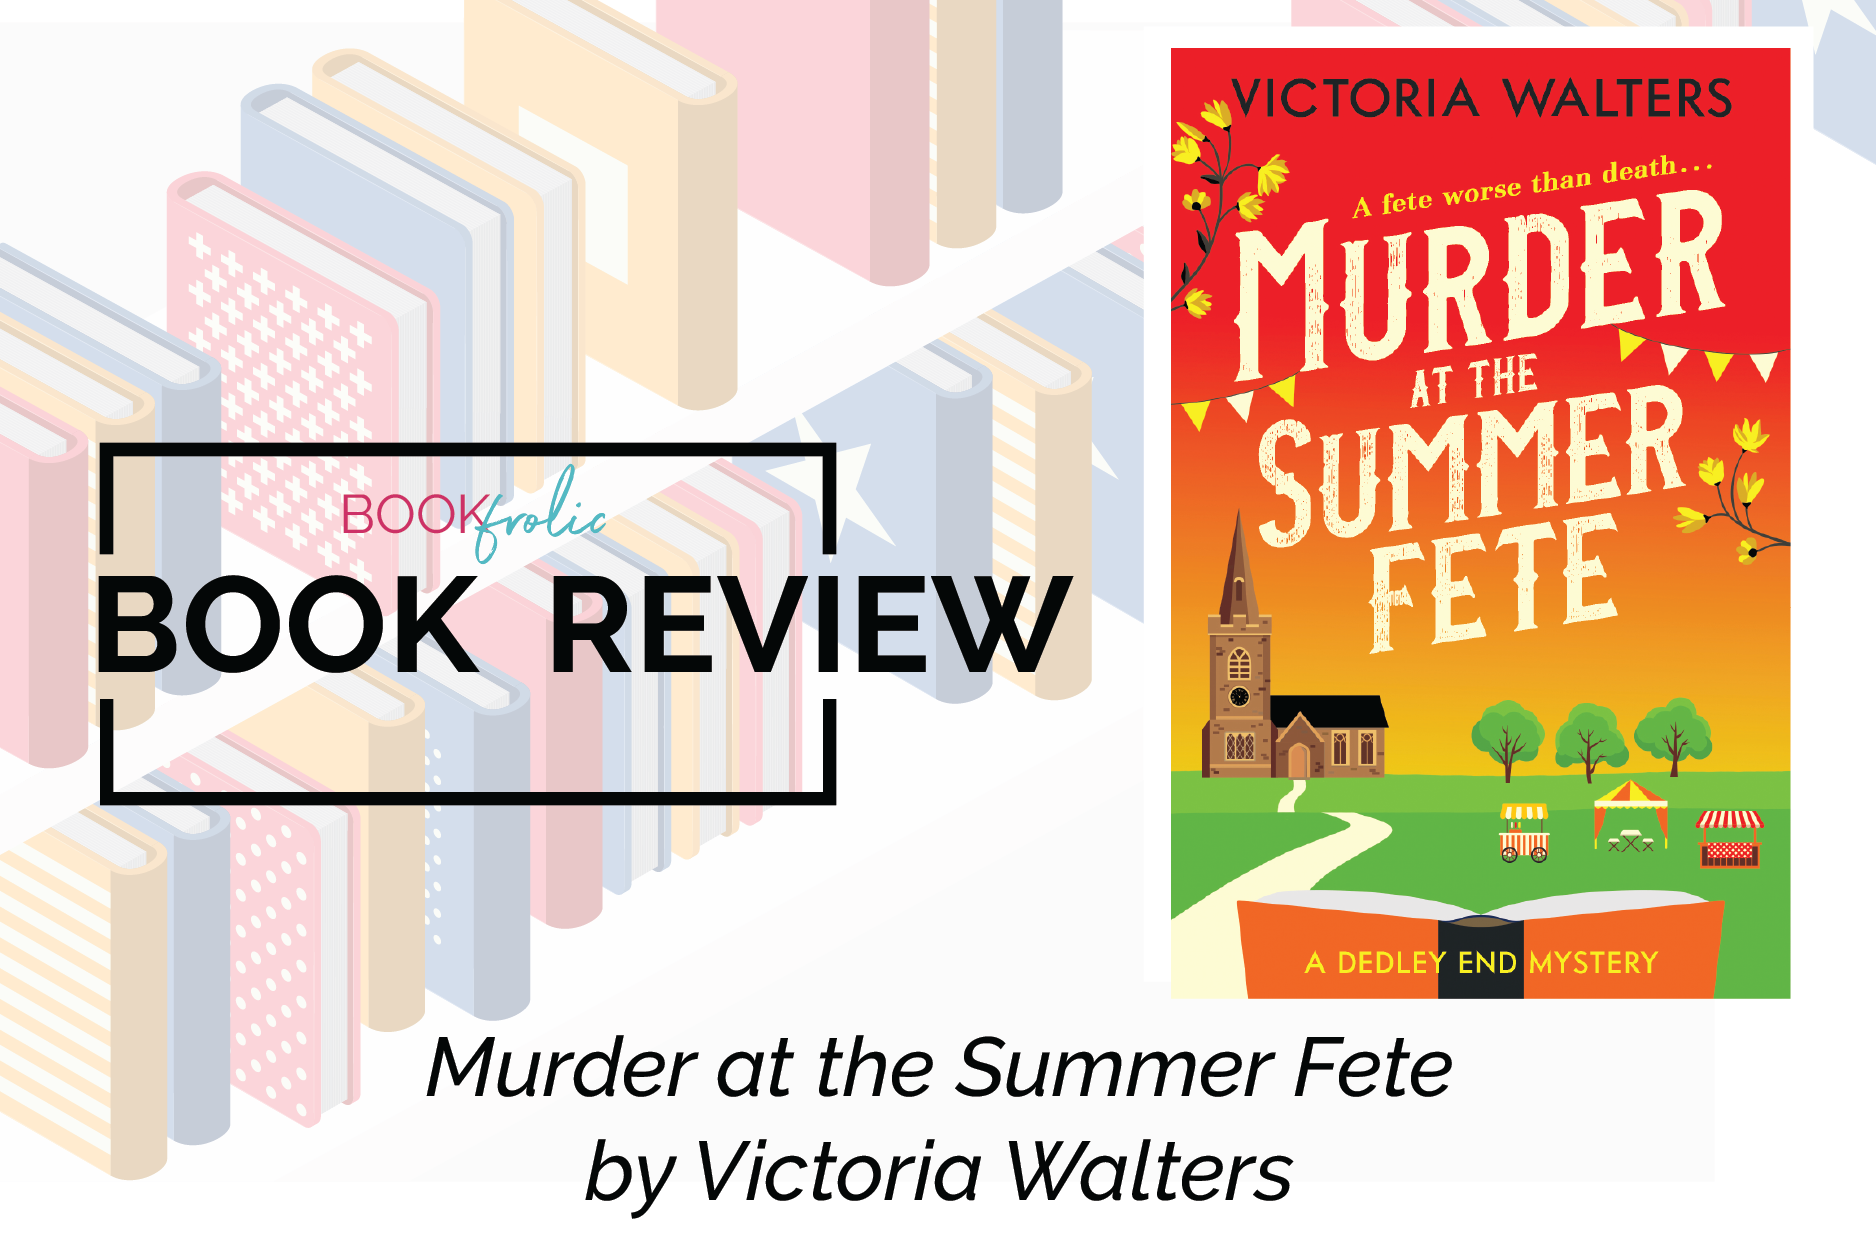 banner for book review of Murder at the Summer Fete by Victoria Walters